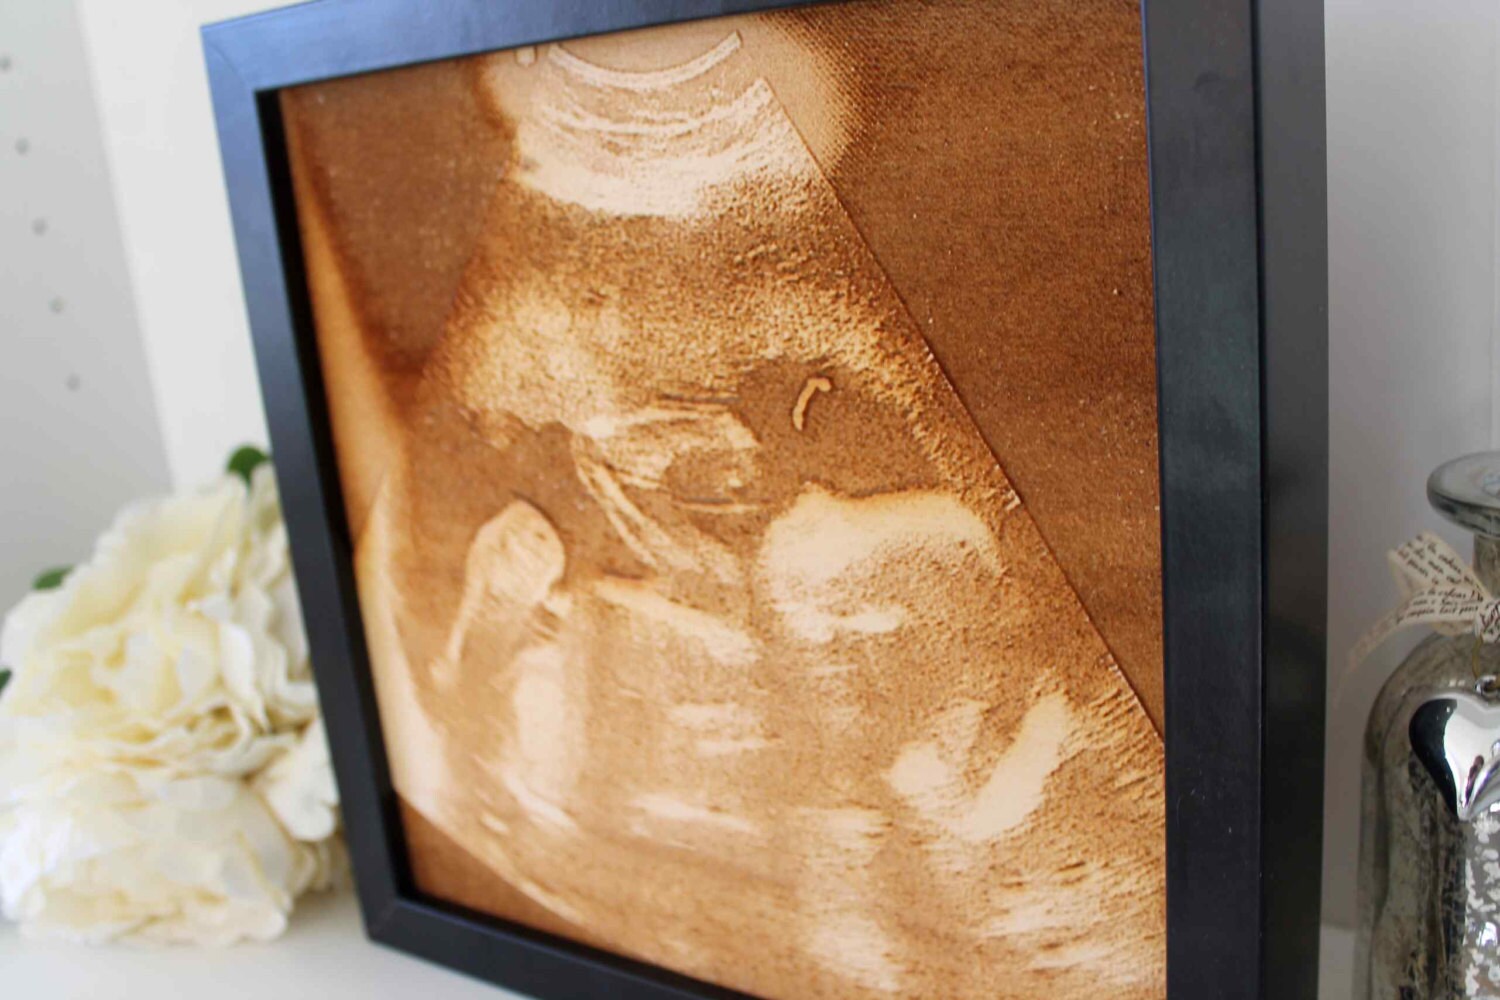 Baby Scan Engraving - Engraved into Wood - Framed Baby Scan